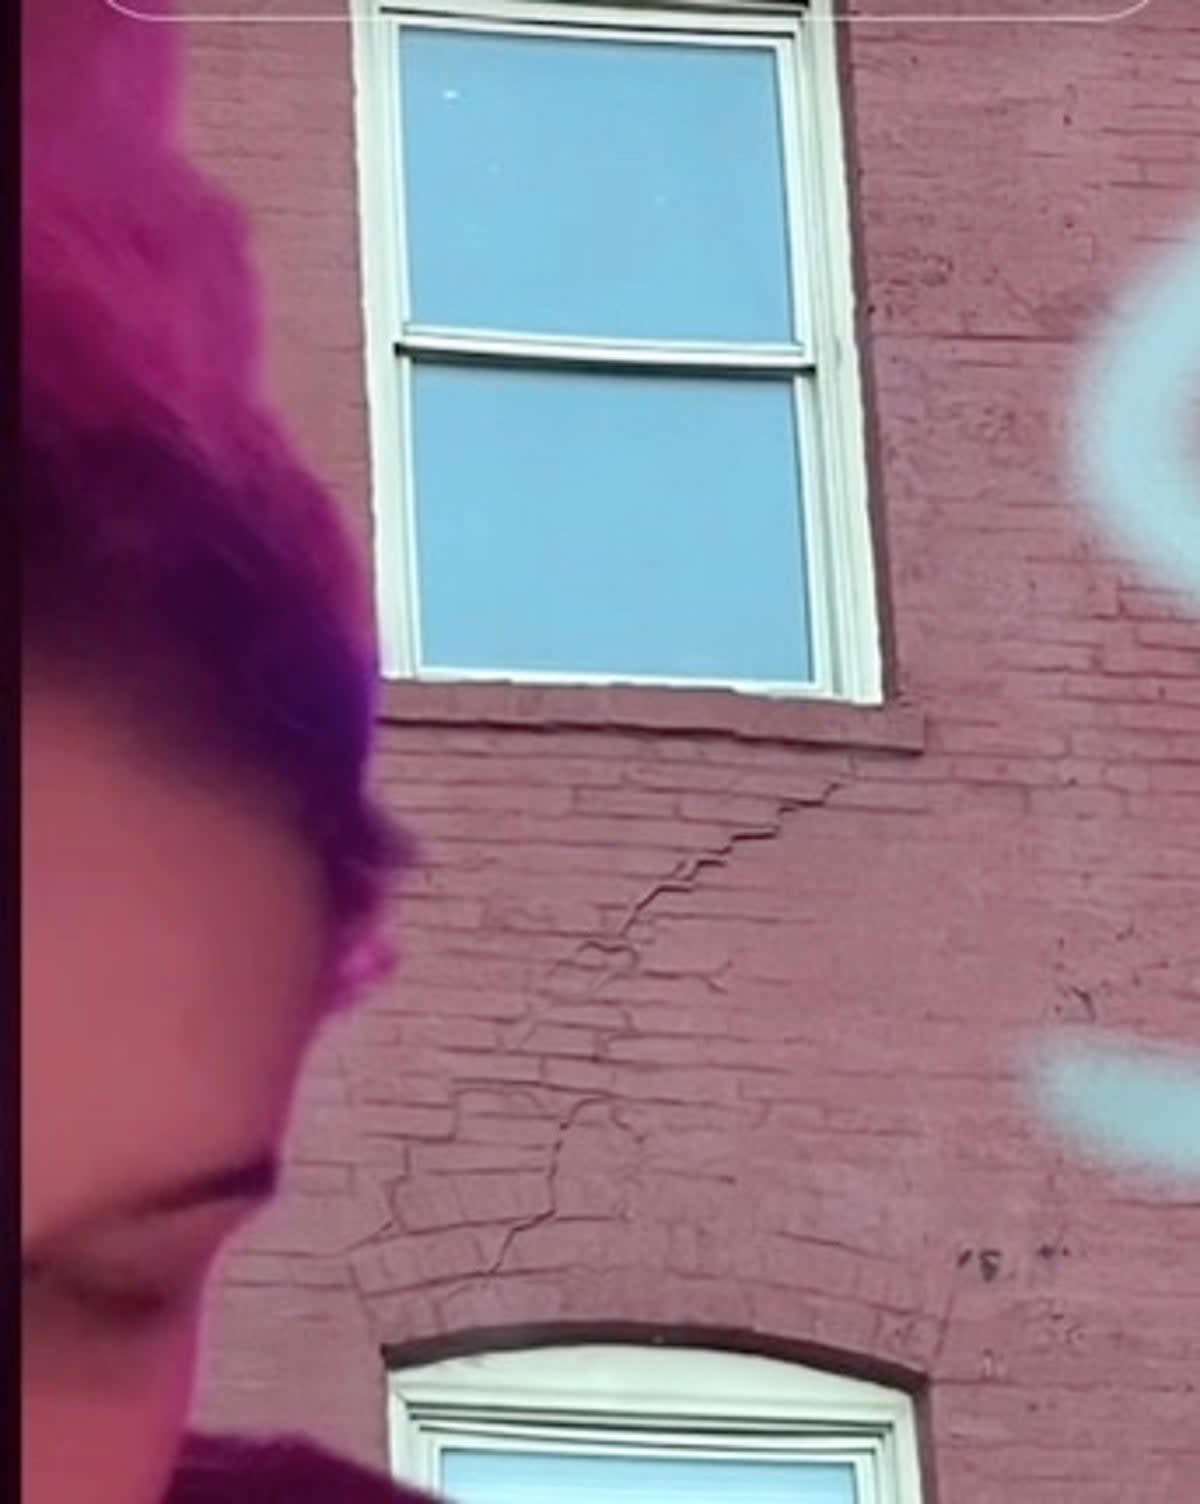 The crack as seen from the outside of the building (TikTok)